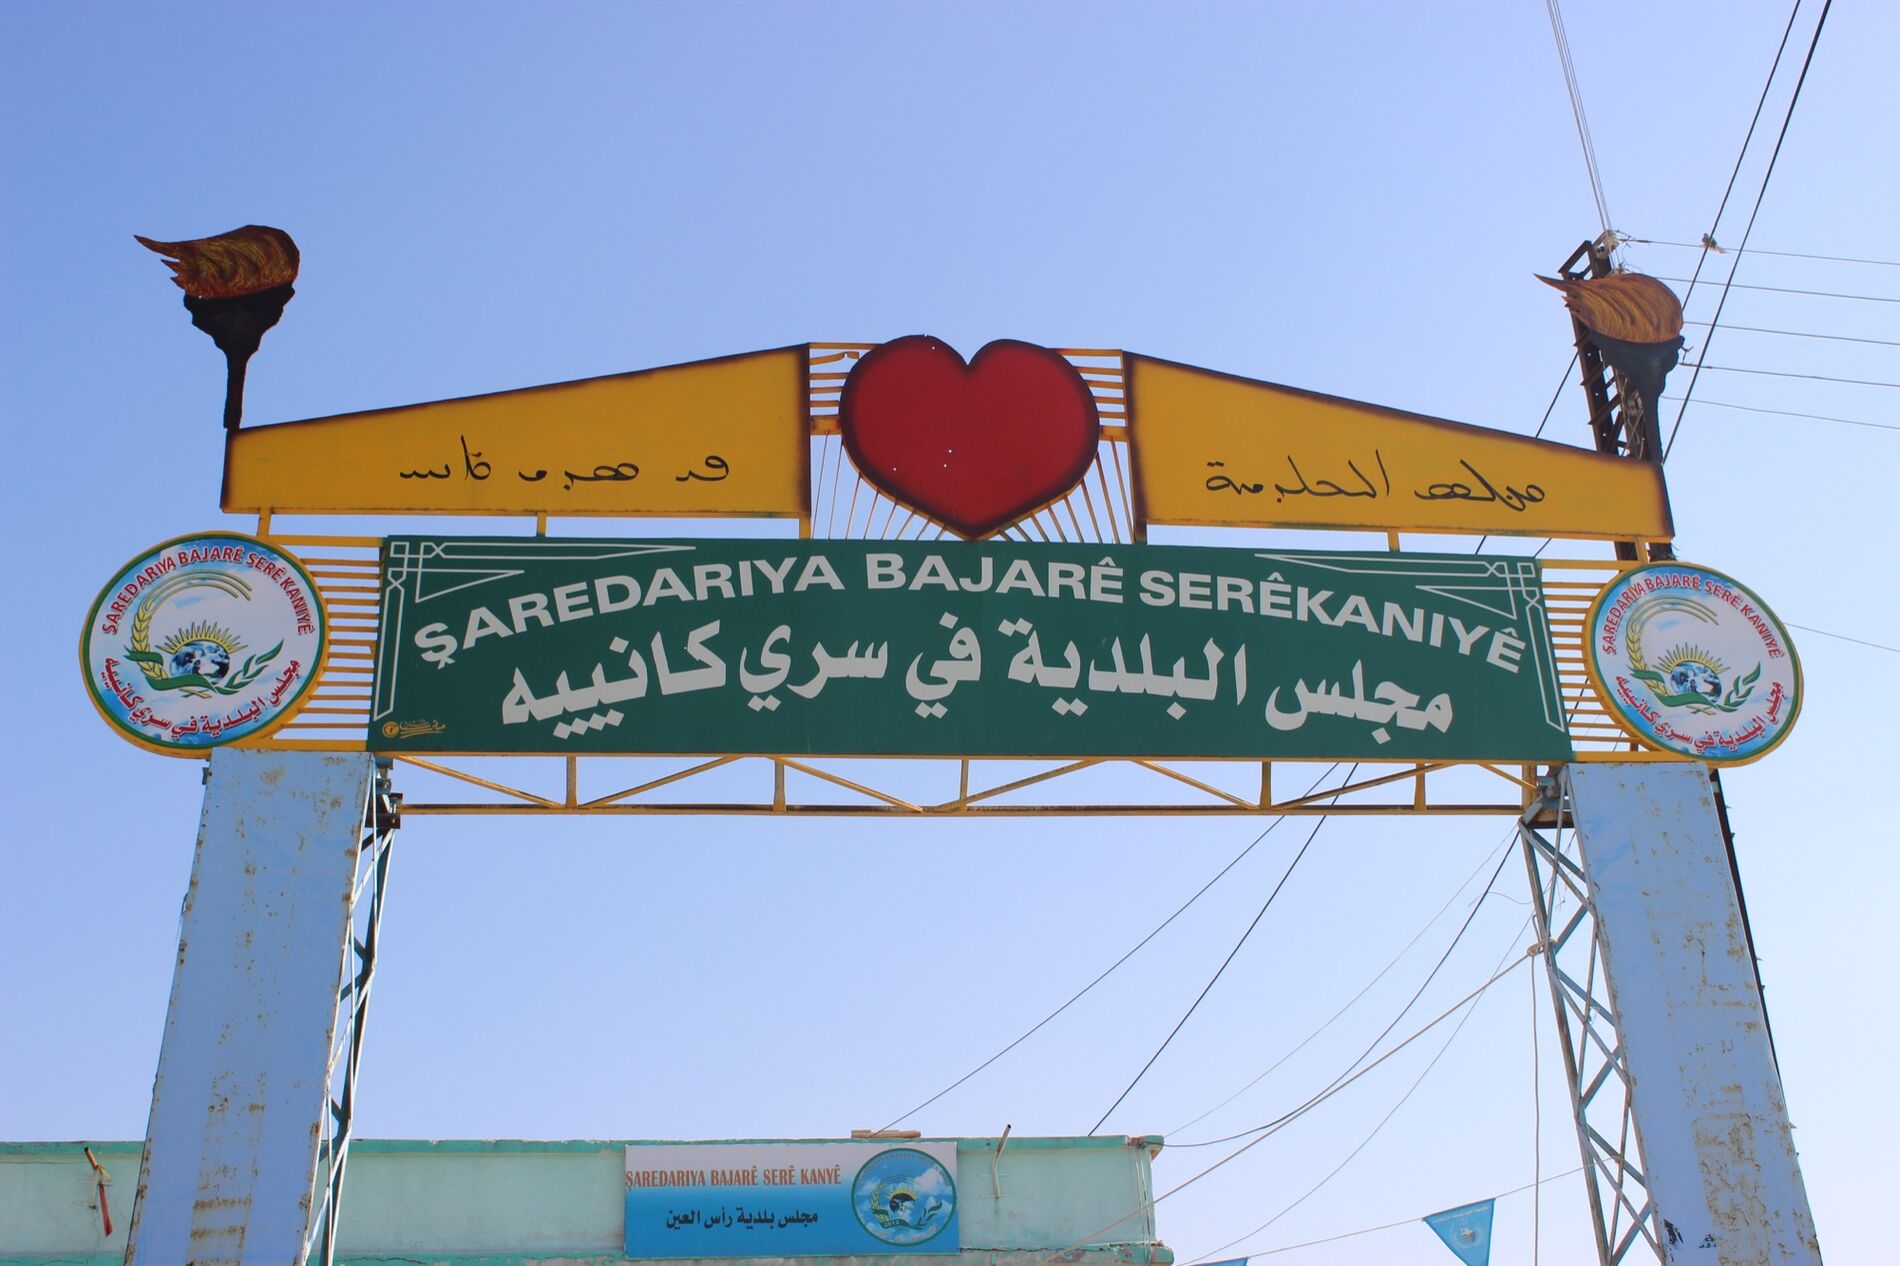 A kind of entrance sign of the city Serekaniye in Northeast Syria, April 2015.